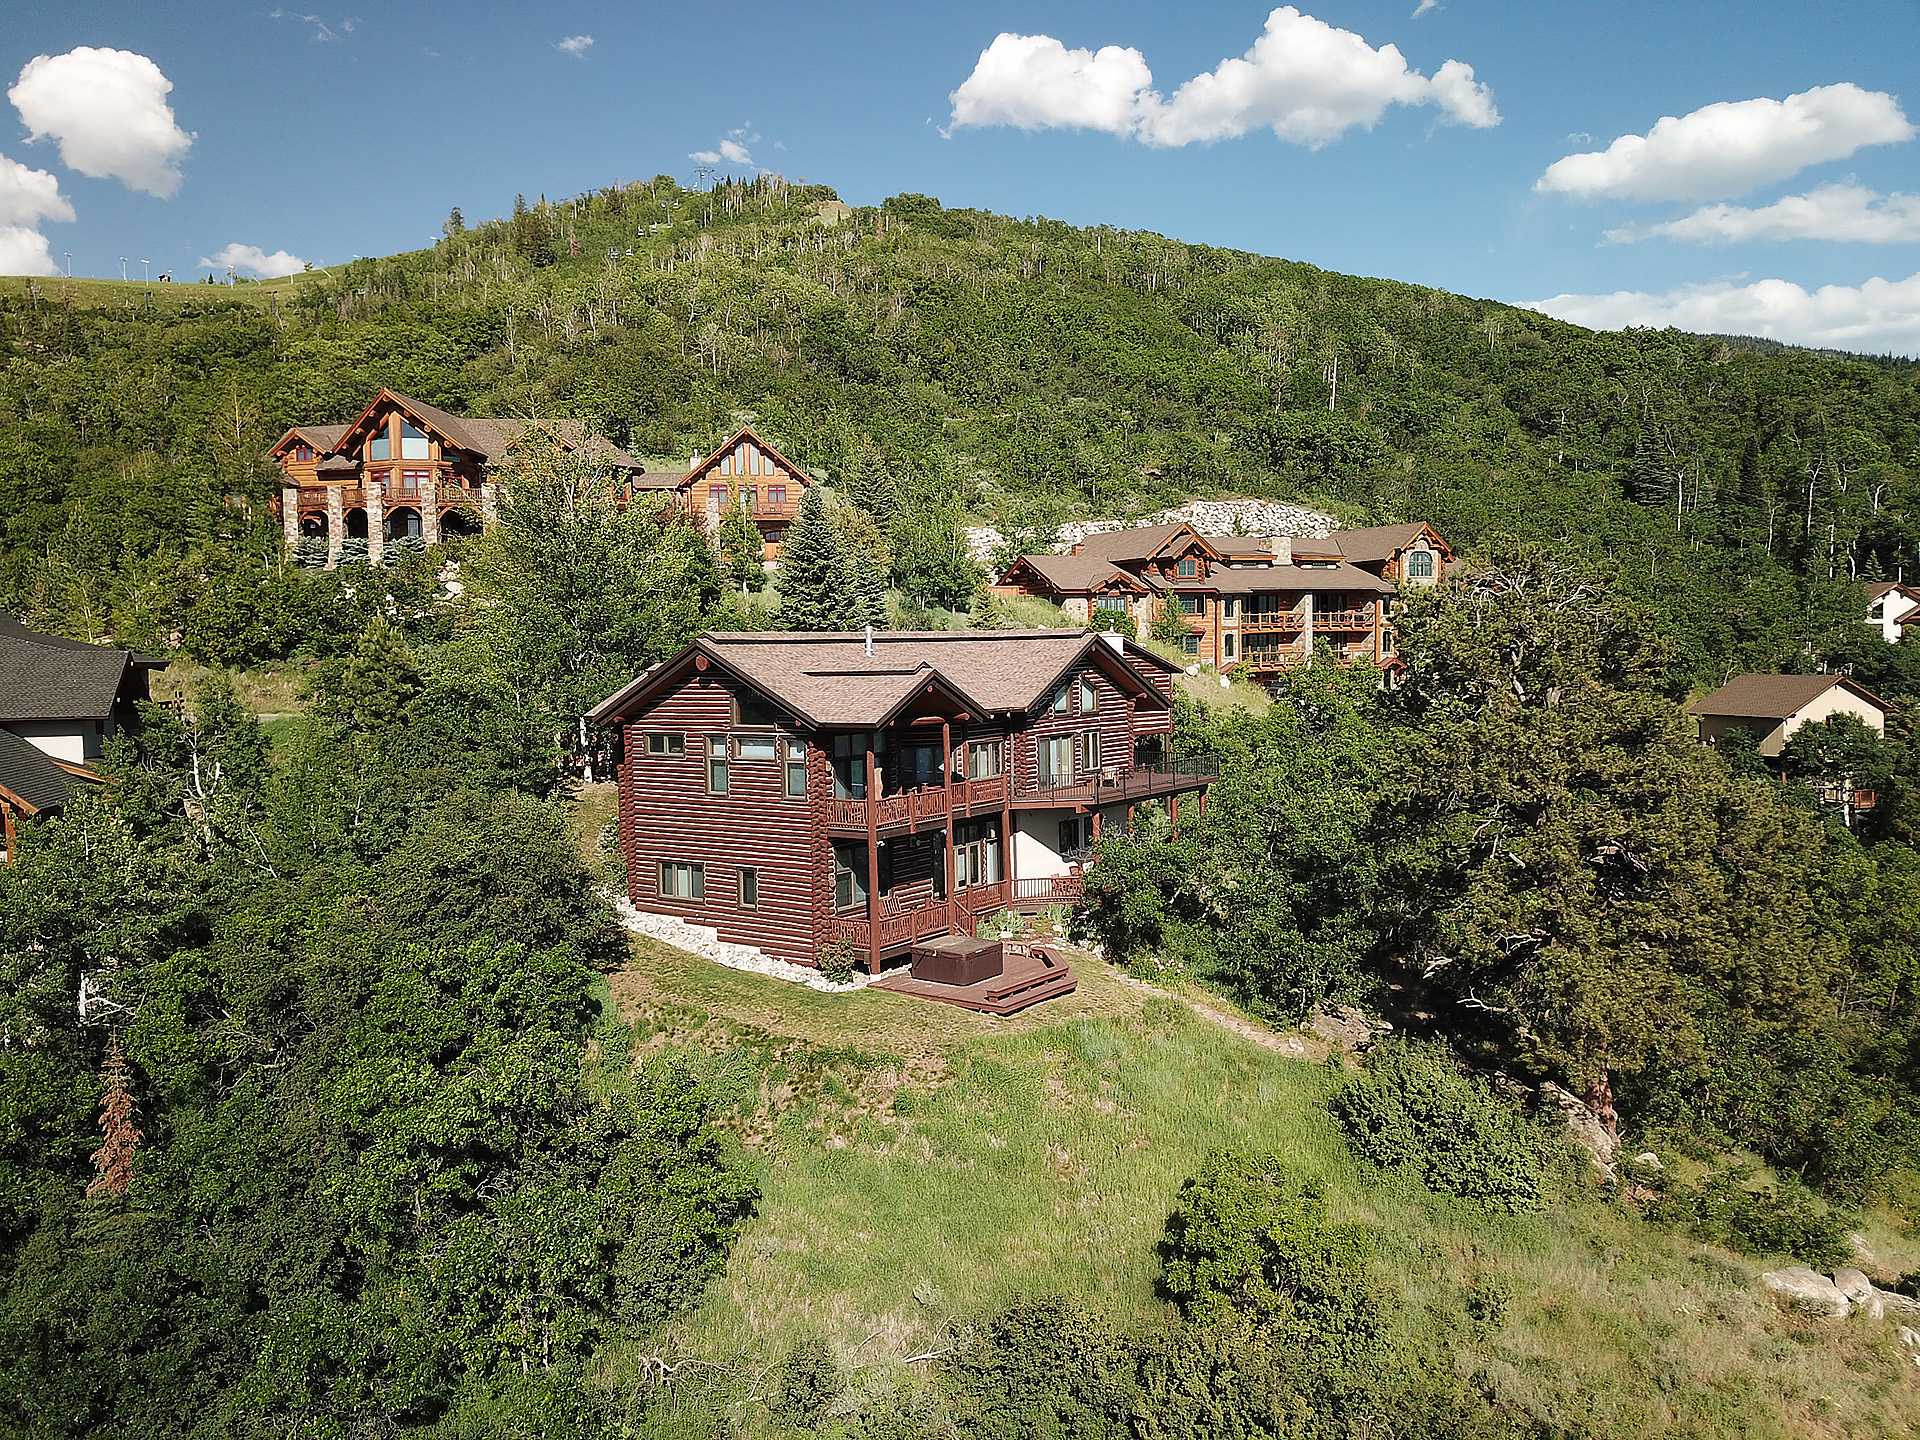 POND by Pioneer Ridge: Colorado Log Home + Breathtaking Views+ Minutes from Base